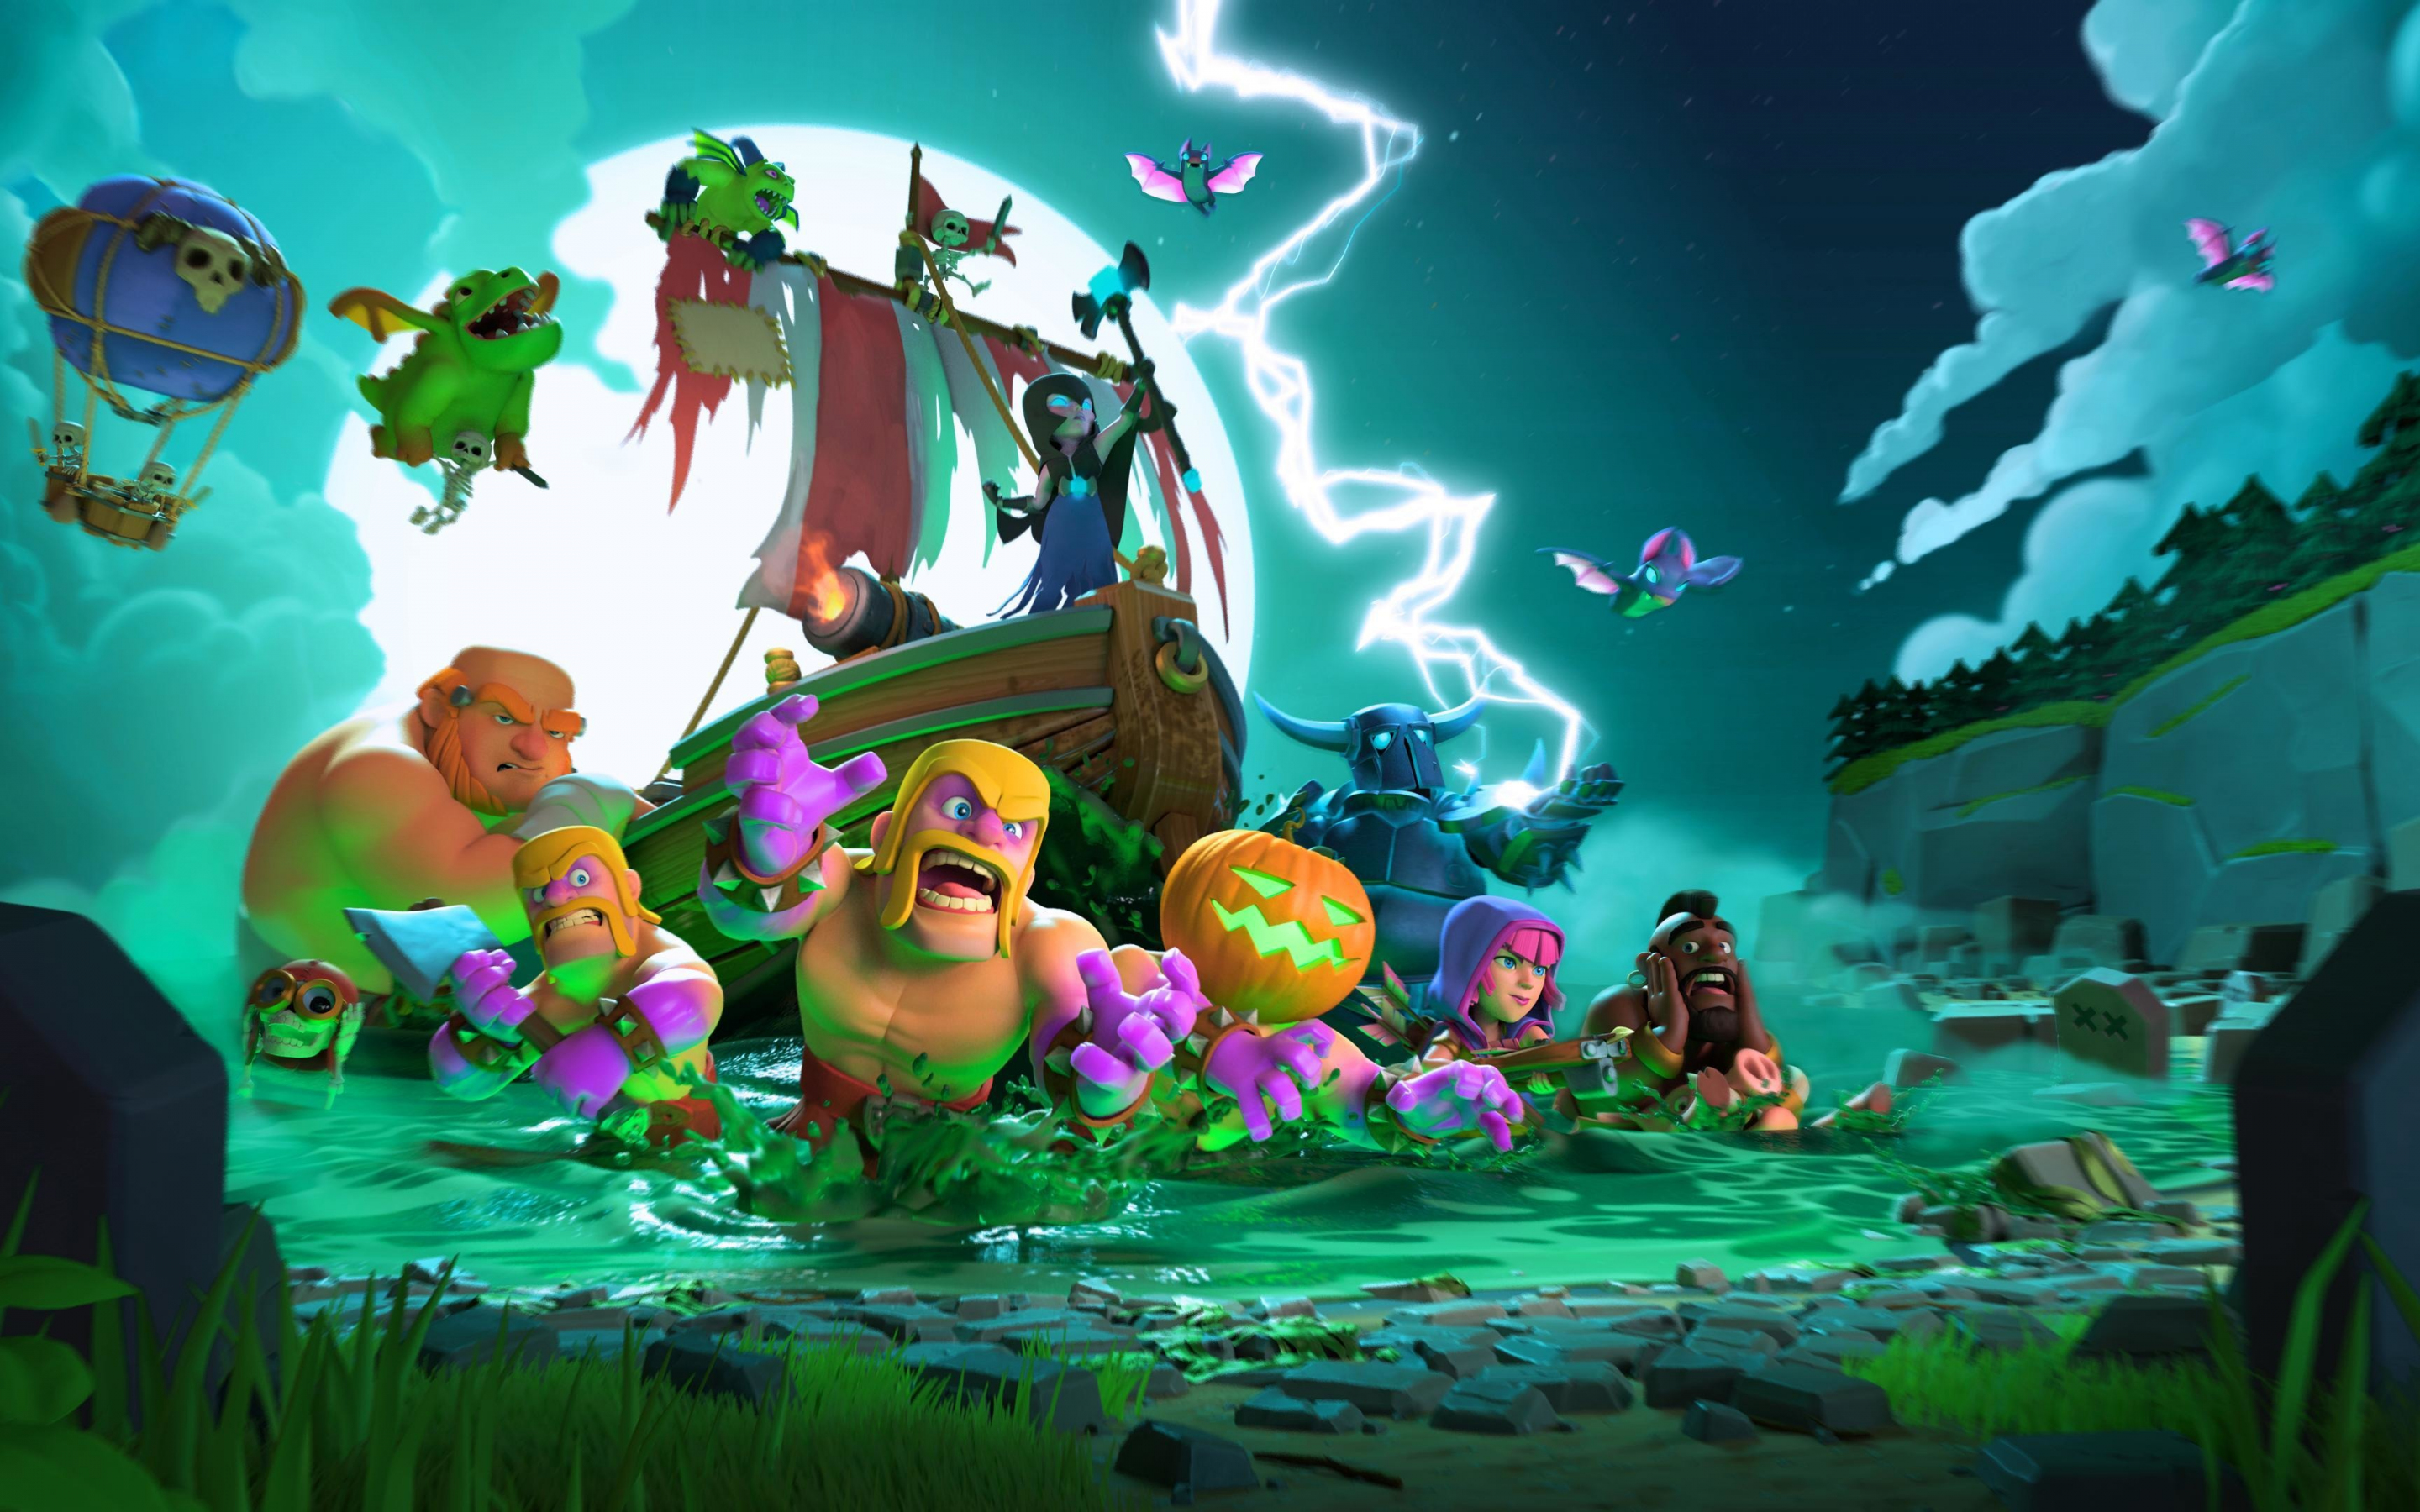 Clash of Clans, mobile game, Halloween, 2880x1800 wallpaper